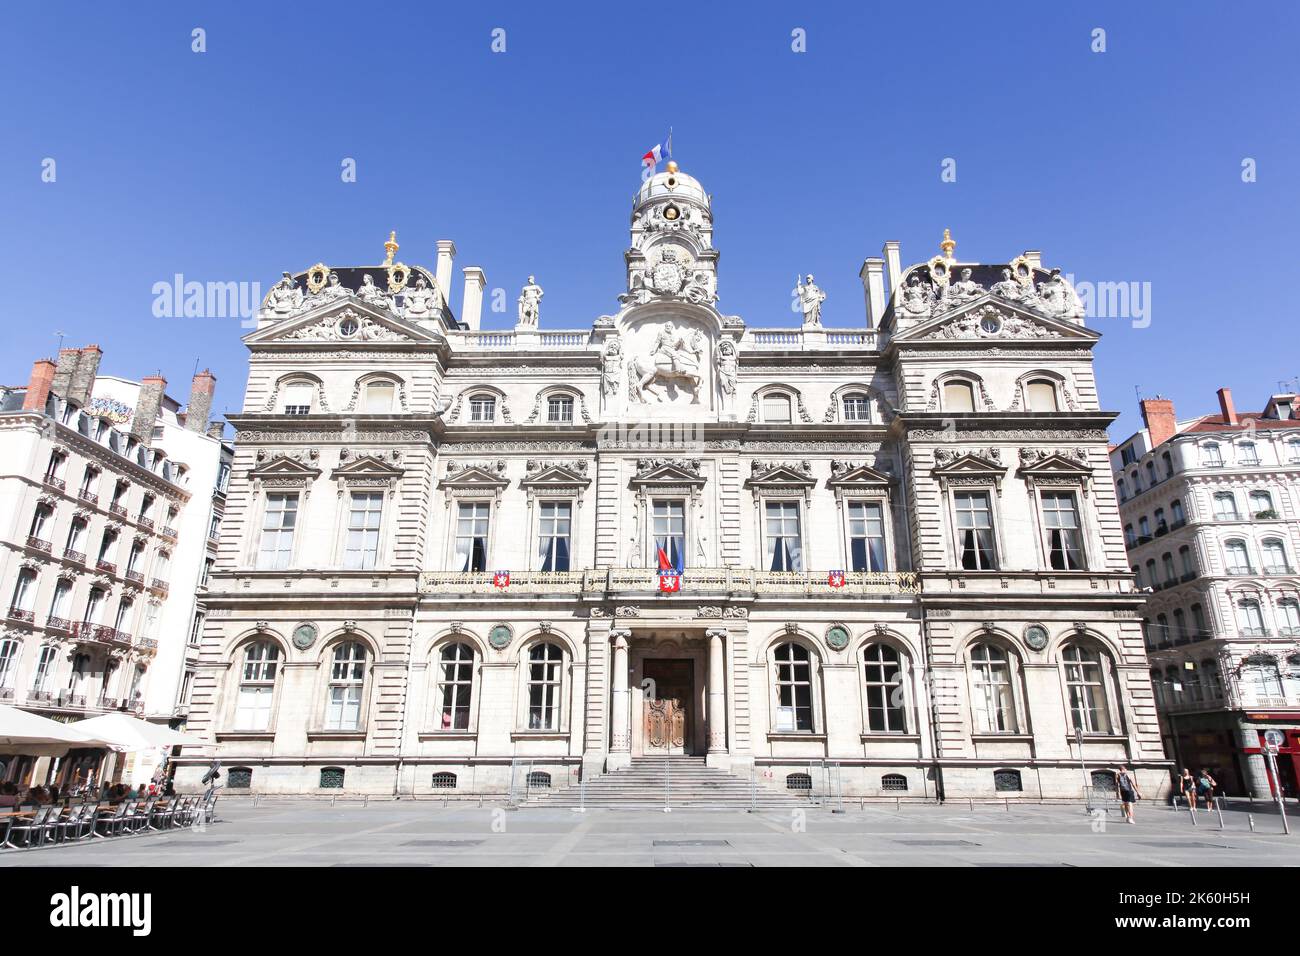 Lyon, France - August 18, 2016: View of the city hall in Lyon, France Stock Photo